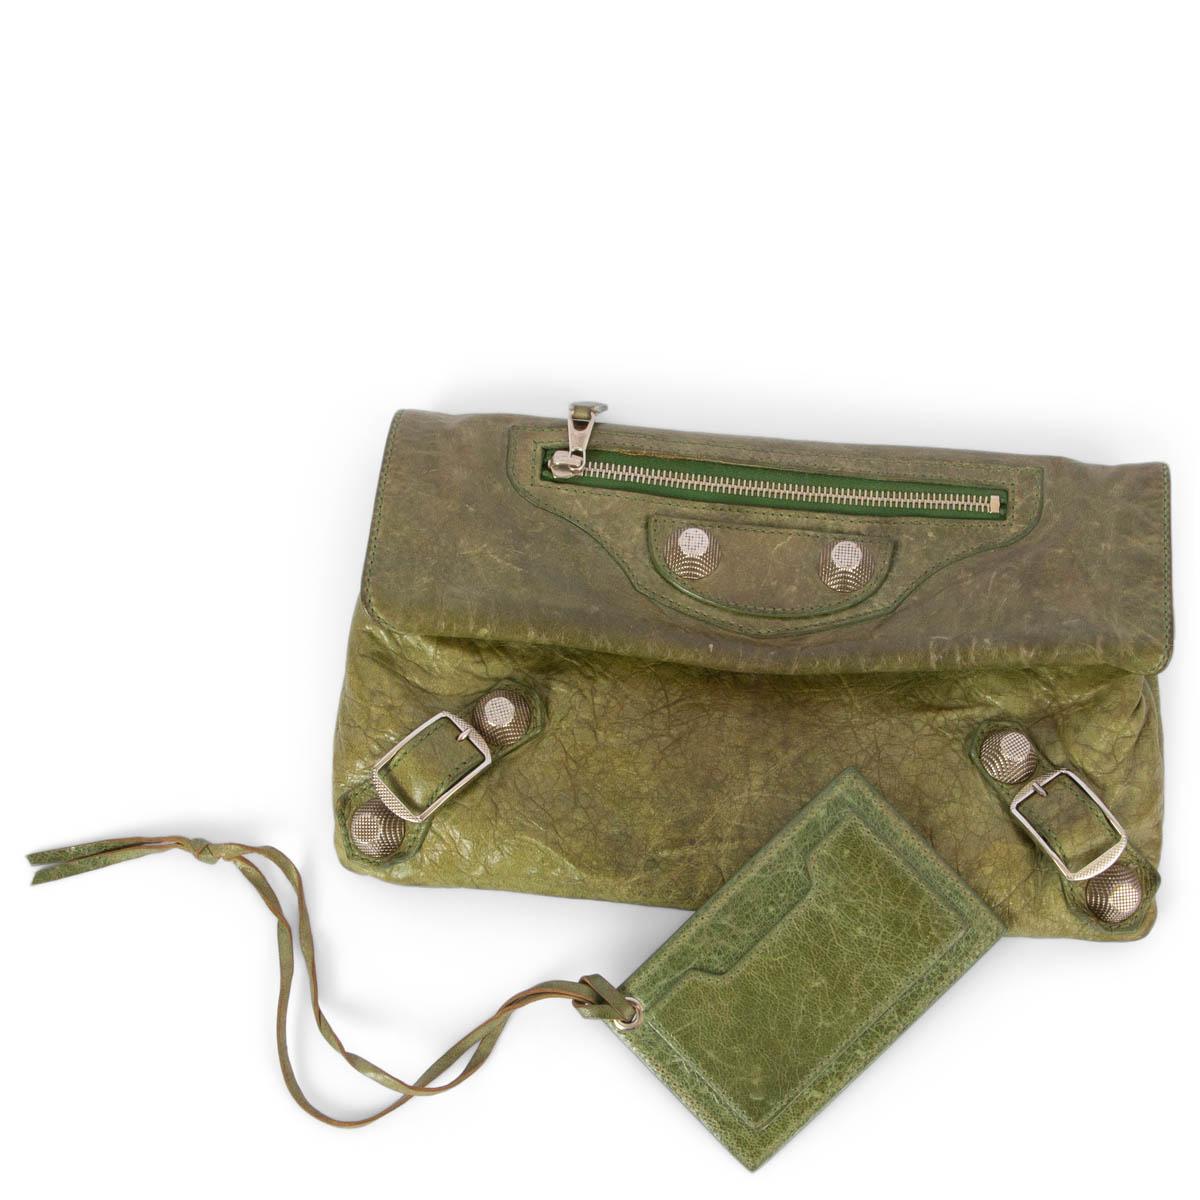 BALENCIAGA Militaire green distressed leather MOTOCROSS GIANT Clutch Bag 2